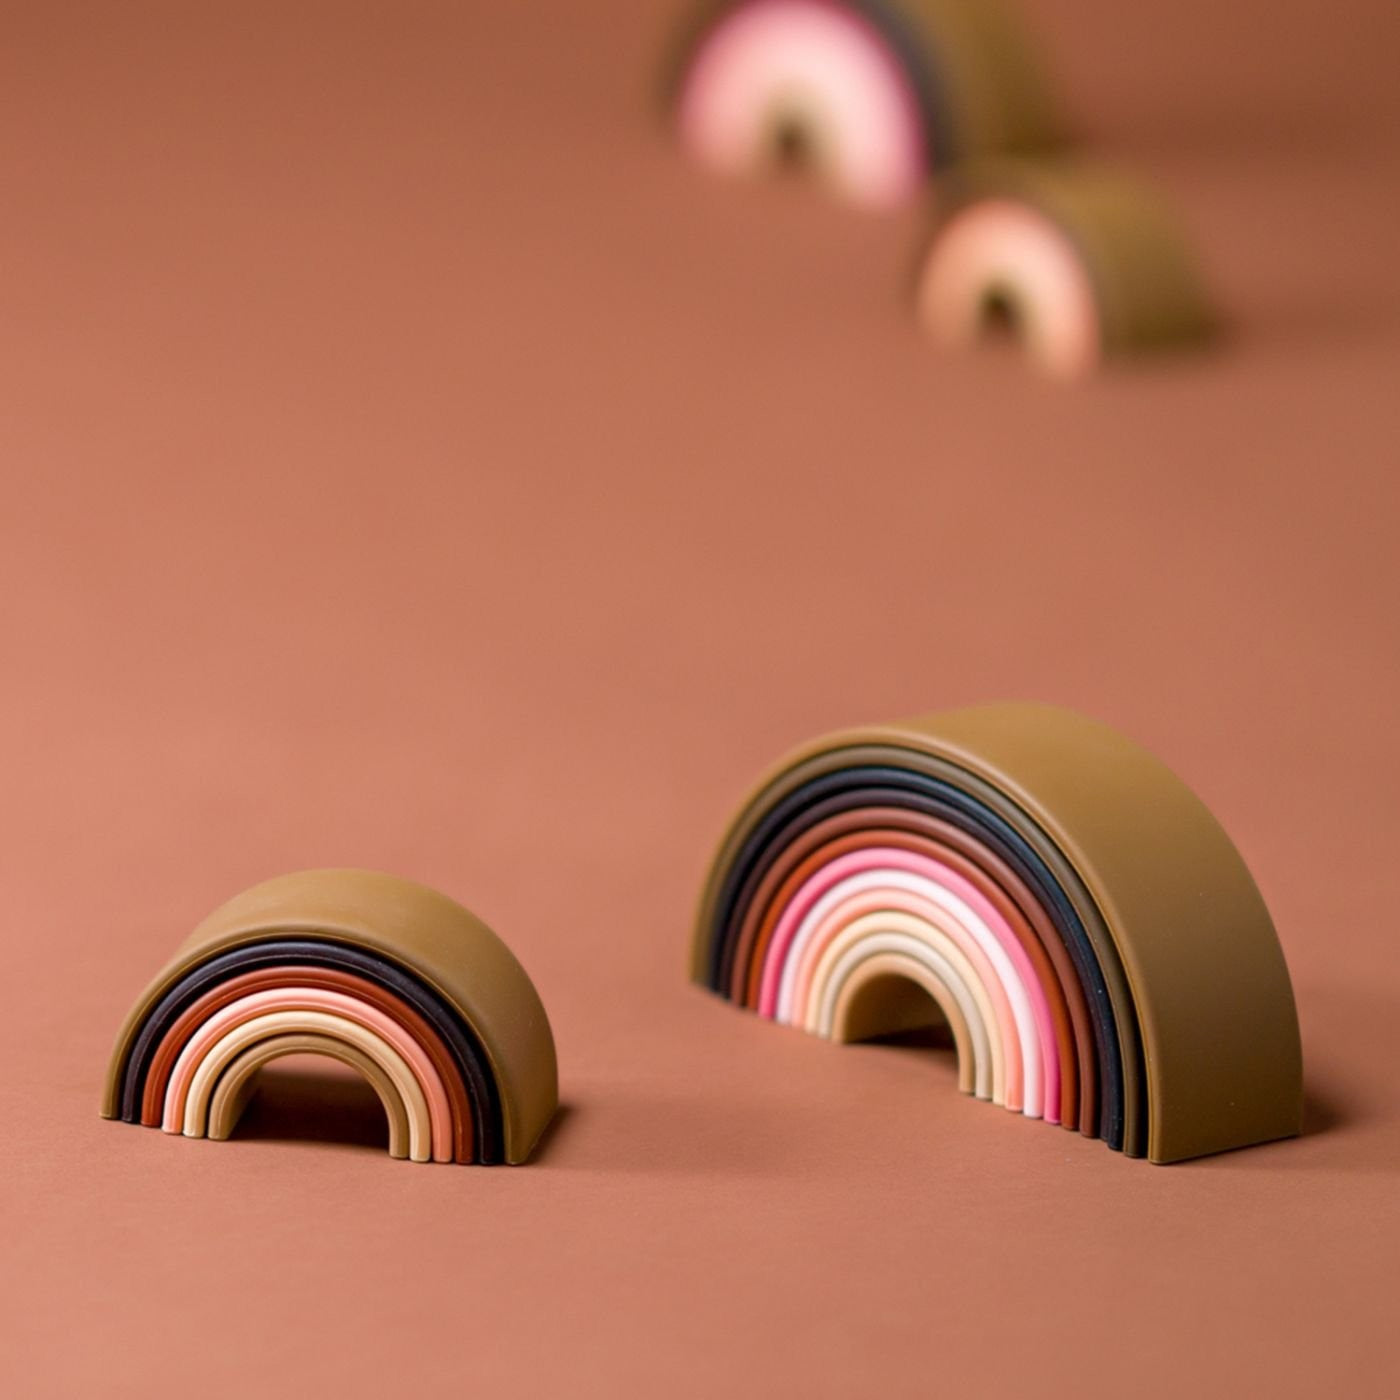 Dena Sensory Silicone Toy - 6 Piece Diversity Rainbow - A Tribute to the Beauty of All Skin Tones